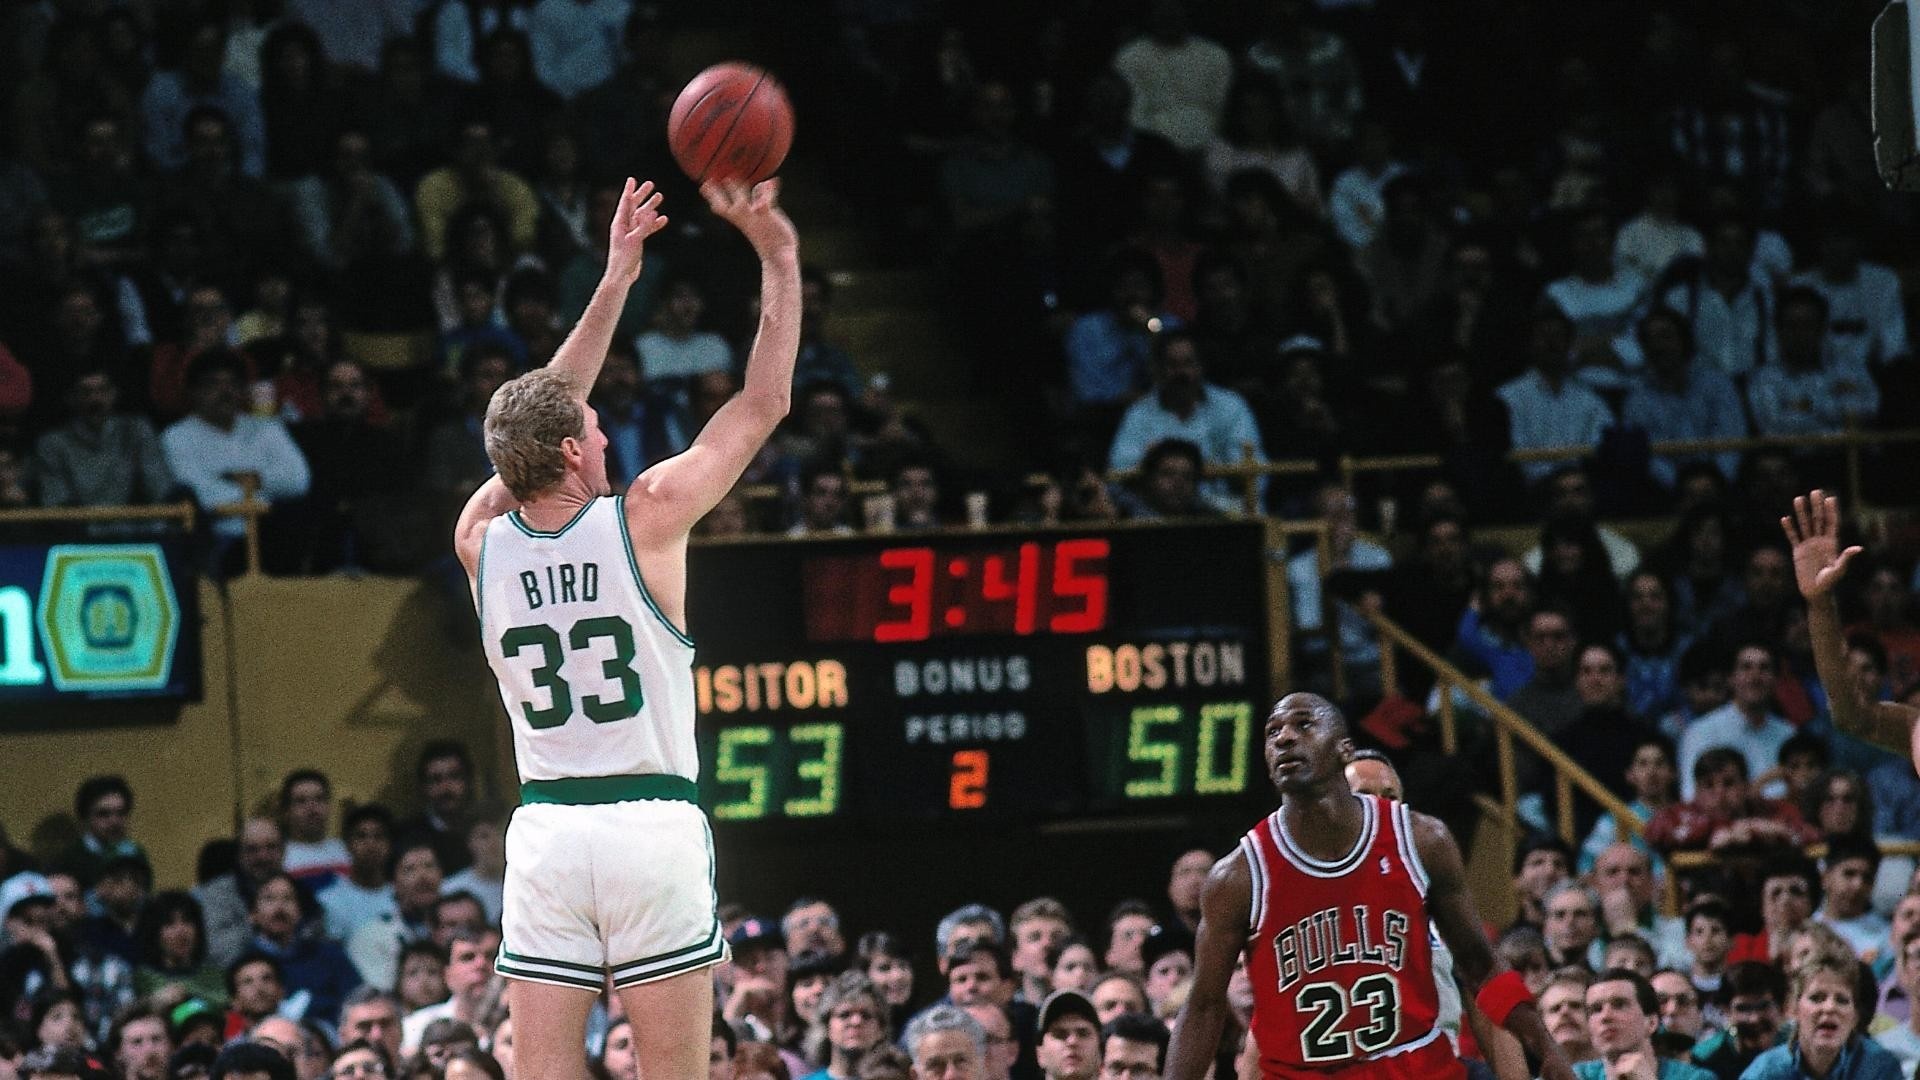 Larry Bird, Wallpaper collection, High-quality images, Desktop and mobile, 1920x1080 Full HD Desktop